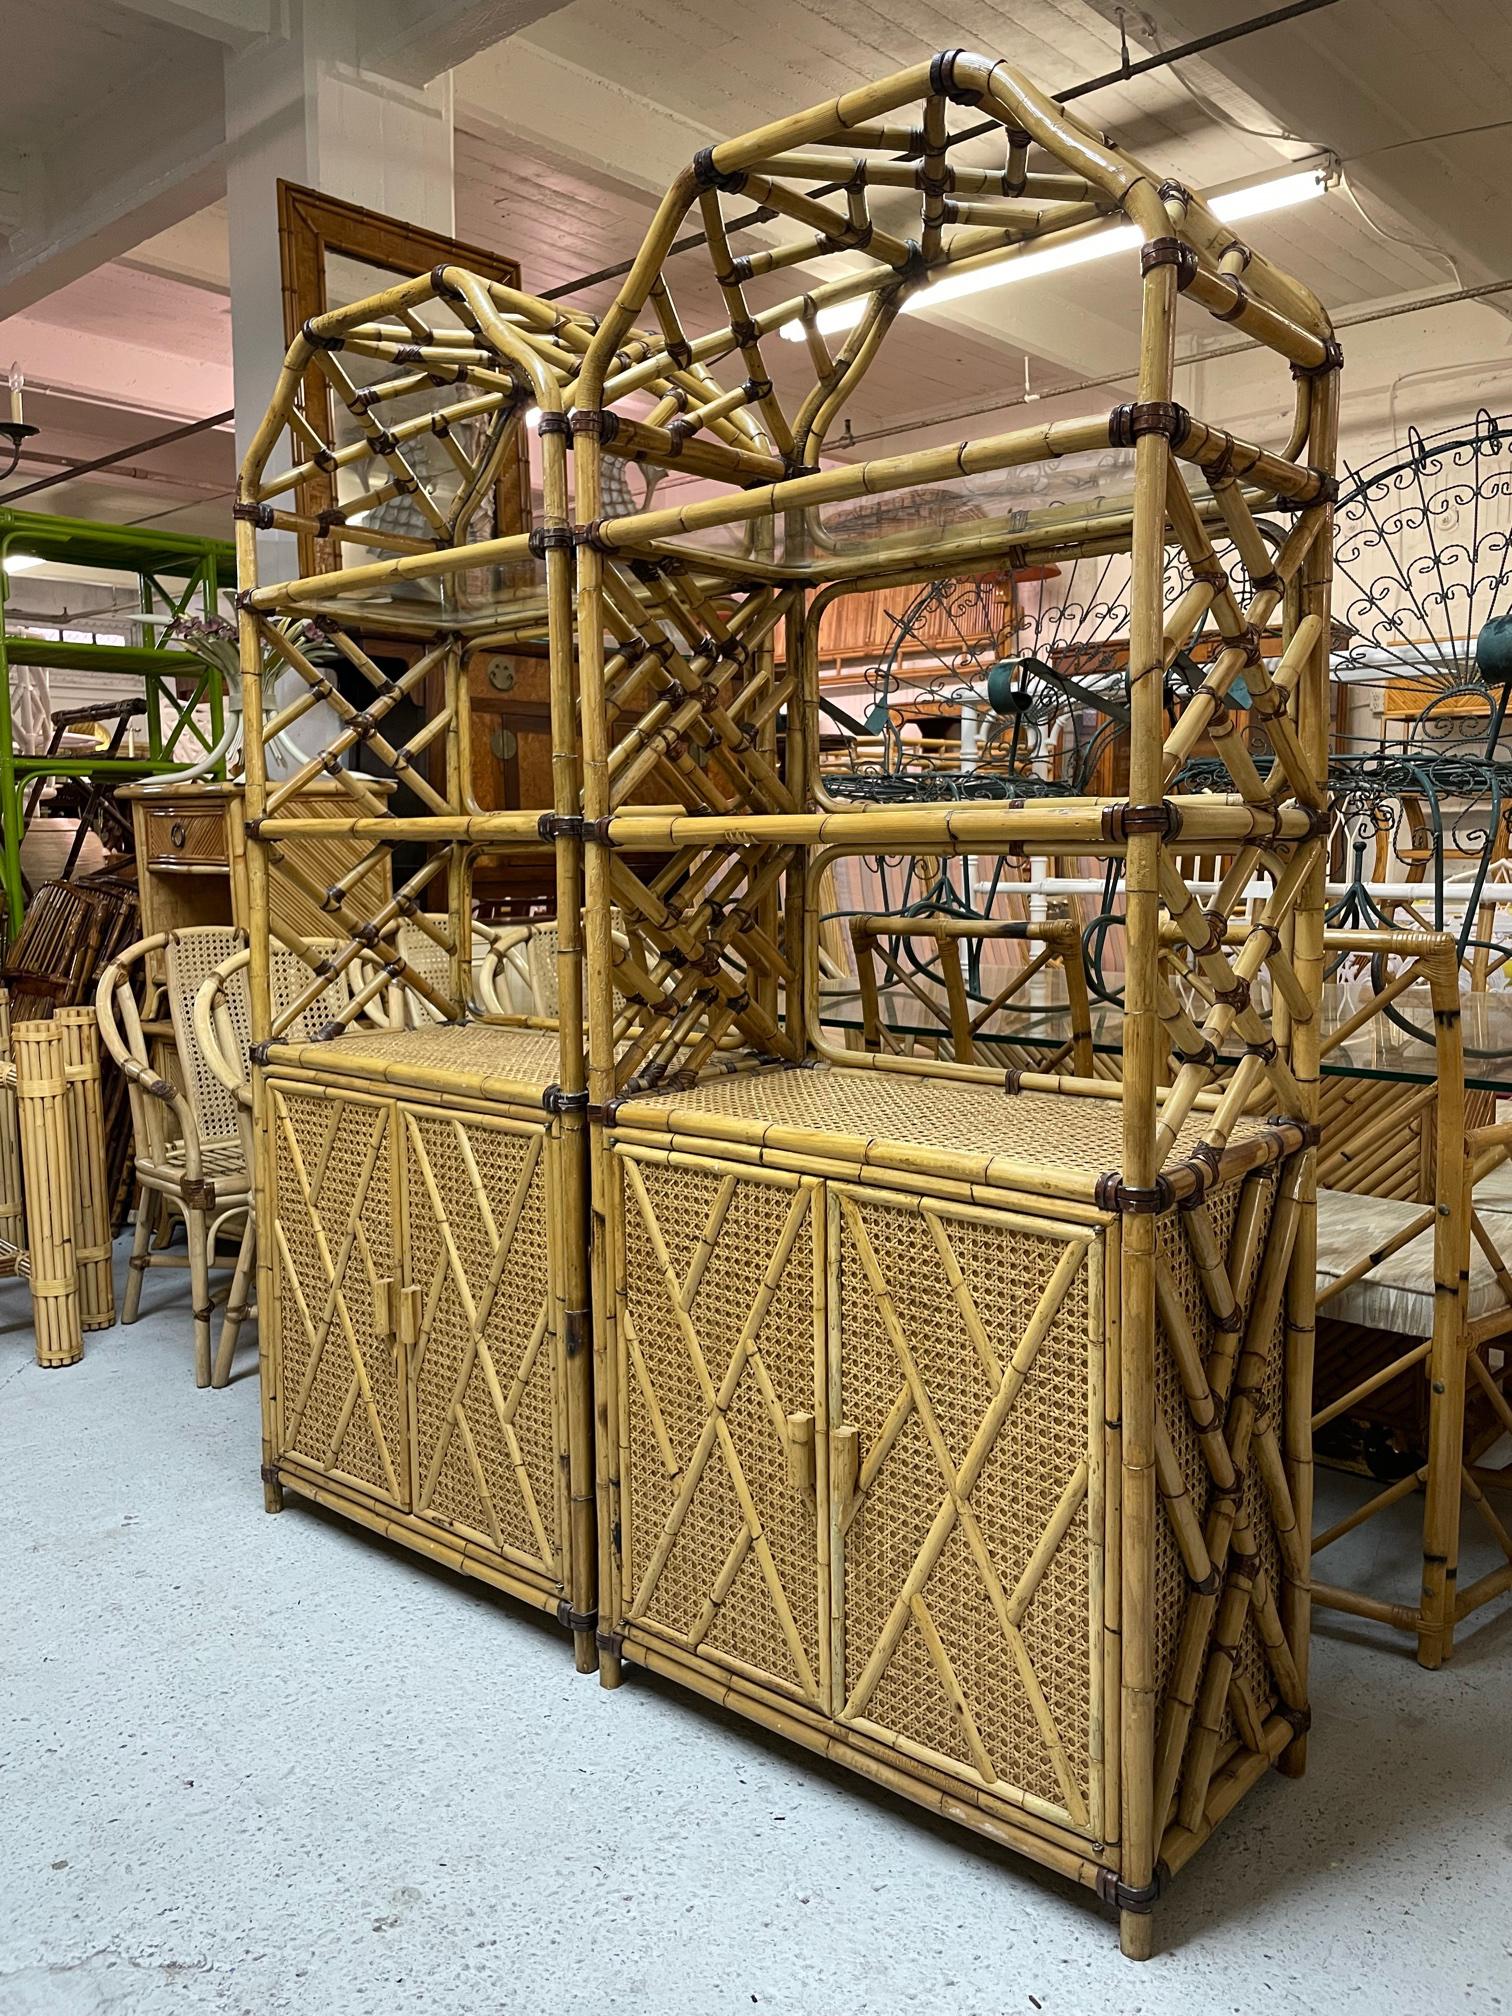 Pair of large rattan etageres feature Chinese chippendale fretwork and cane veneered shelves. Beautiful chinoiserie style pagoda tops and glass shelving. One unit has a large open 2-space storage area behind double doors, the other has 3 drawers.